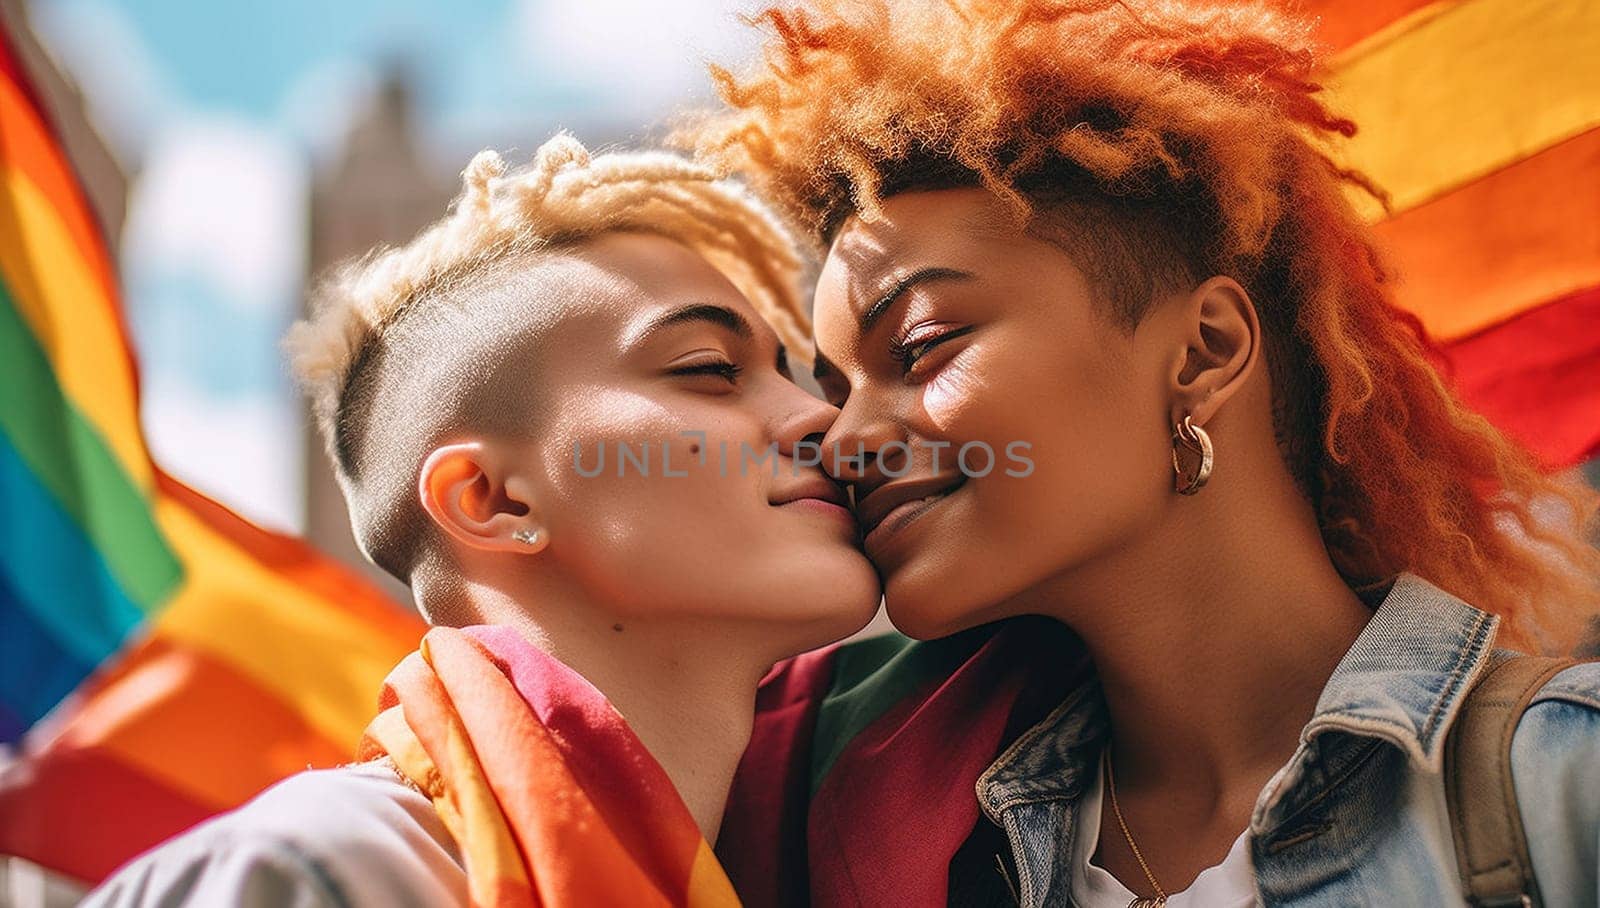 Portrait of young gay,lesbian couple embracing and showing their love with rainbow flag at the street. LGBTQ and love concept. LGBT Community